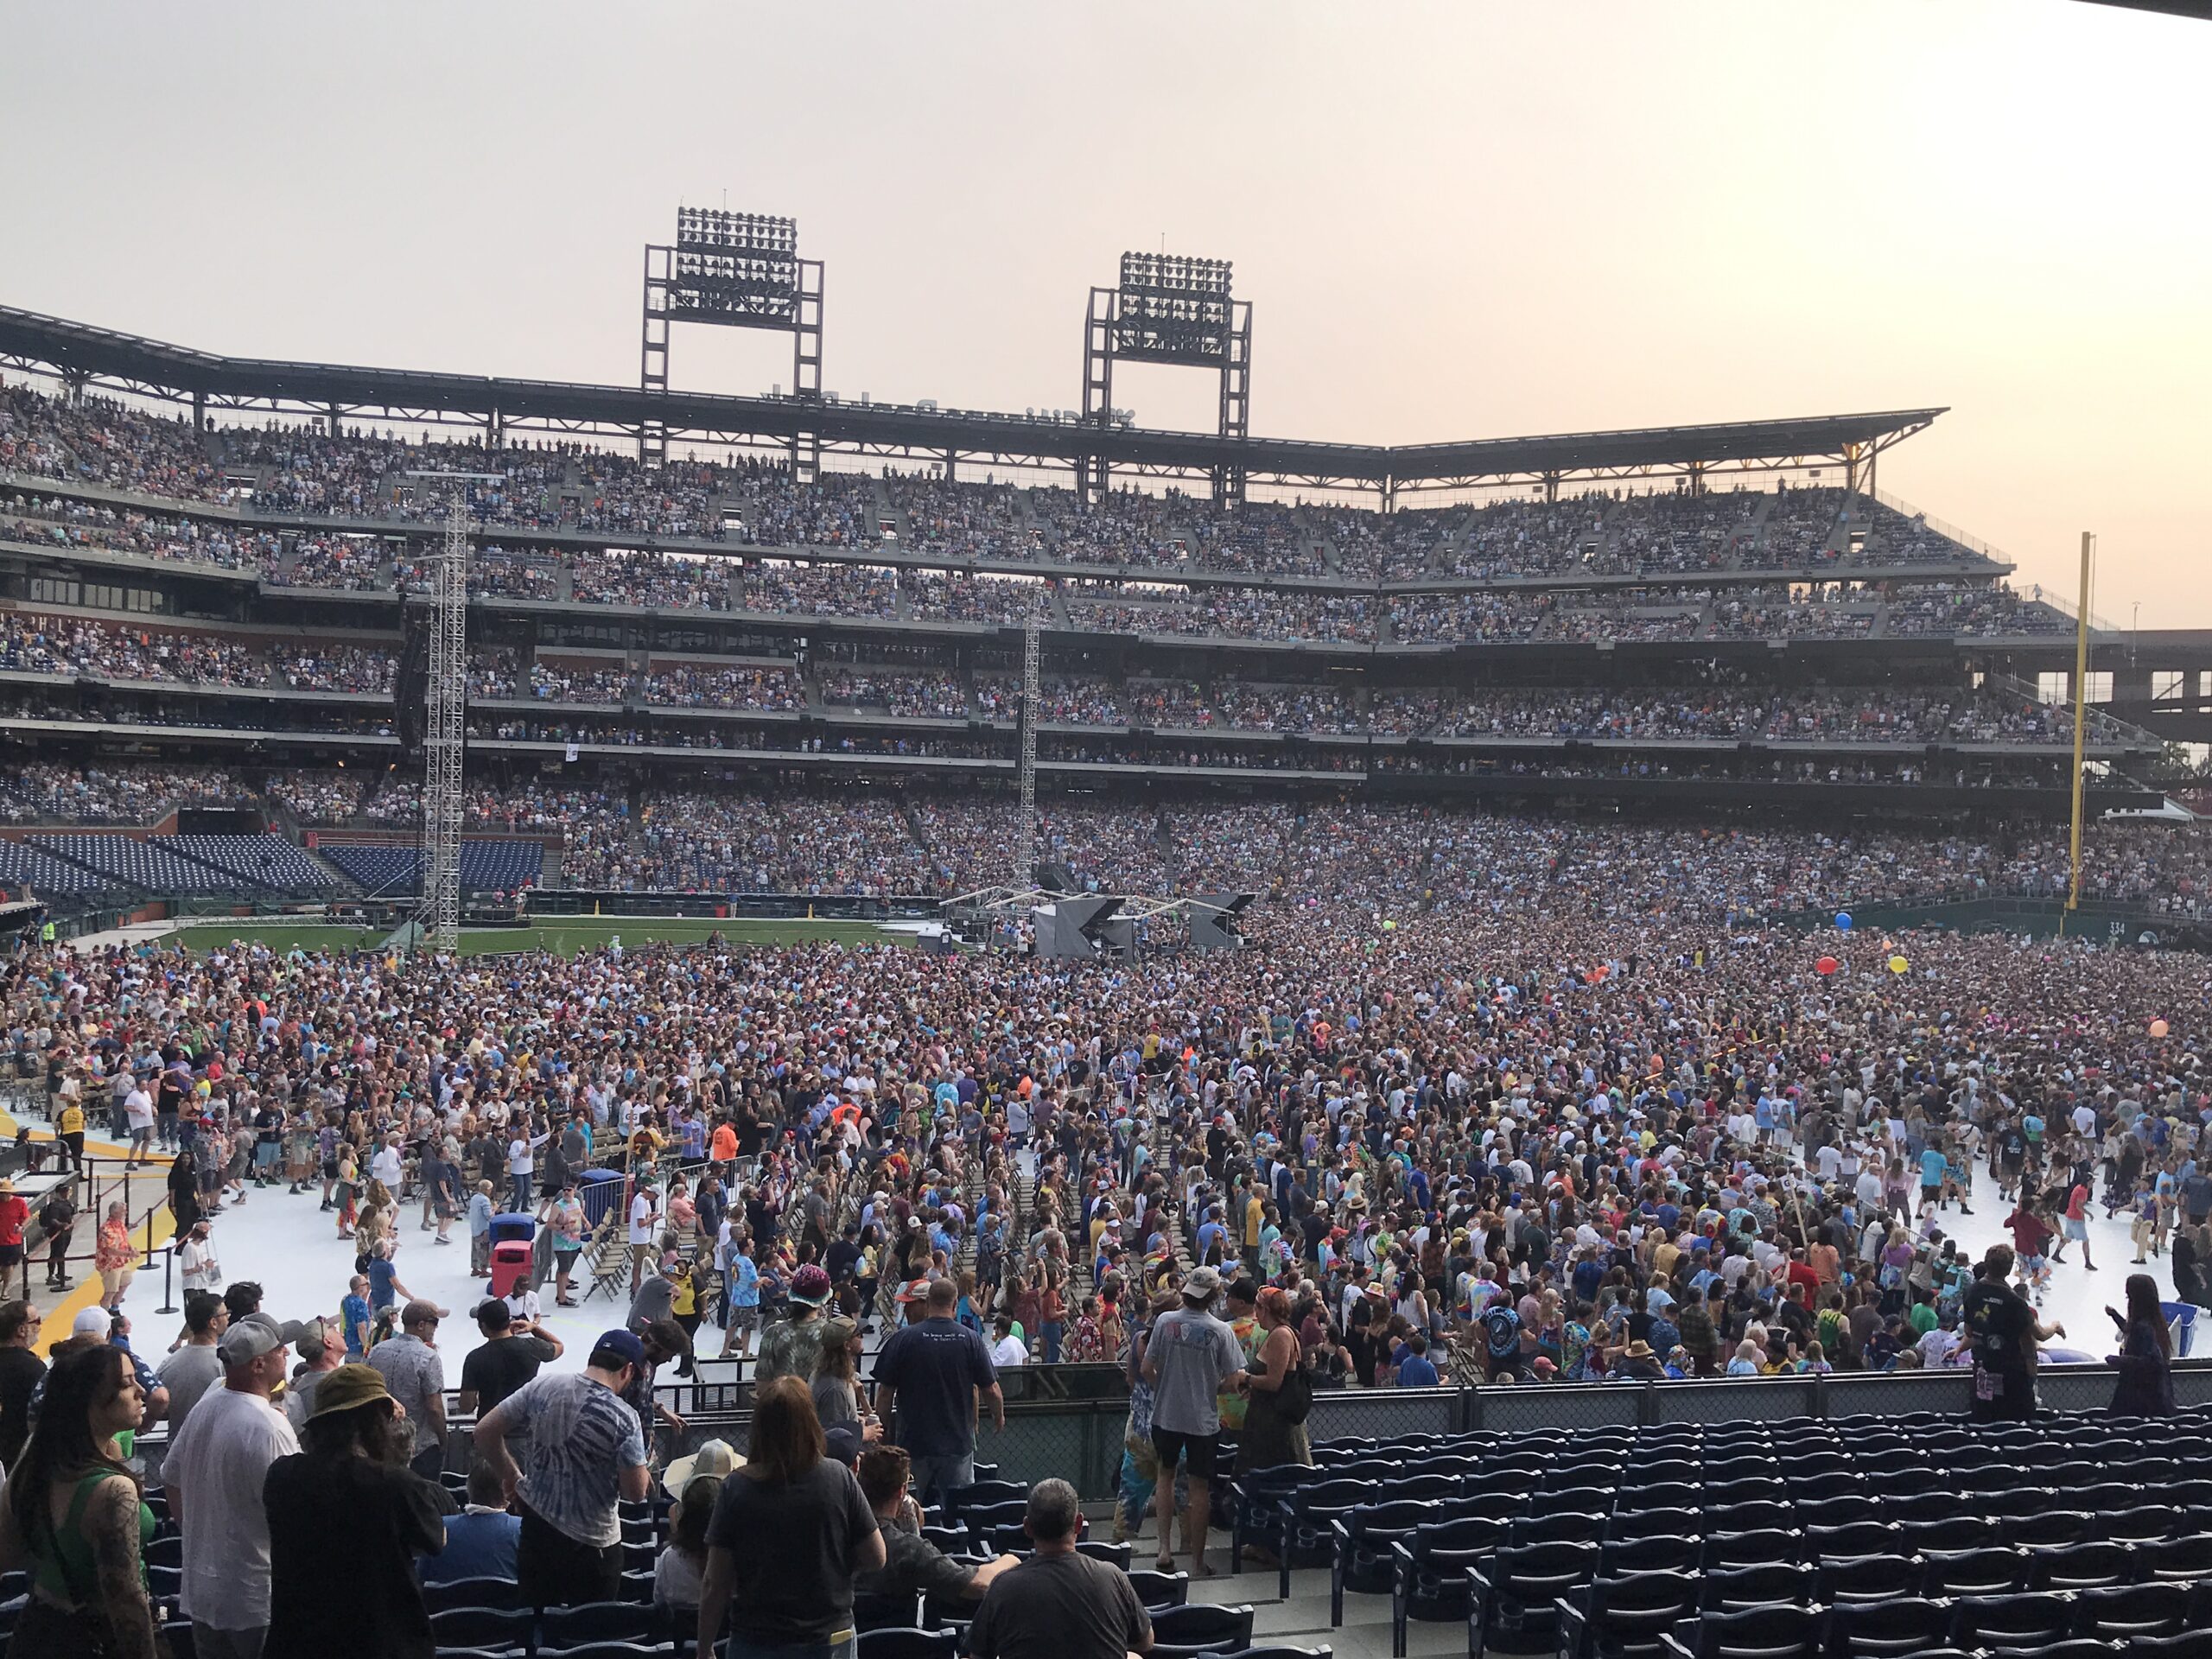 Deadheads fill Citizens Bank Park in Philadelphia to see Dead and Company one last time.